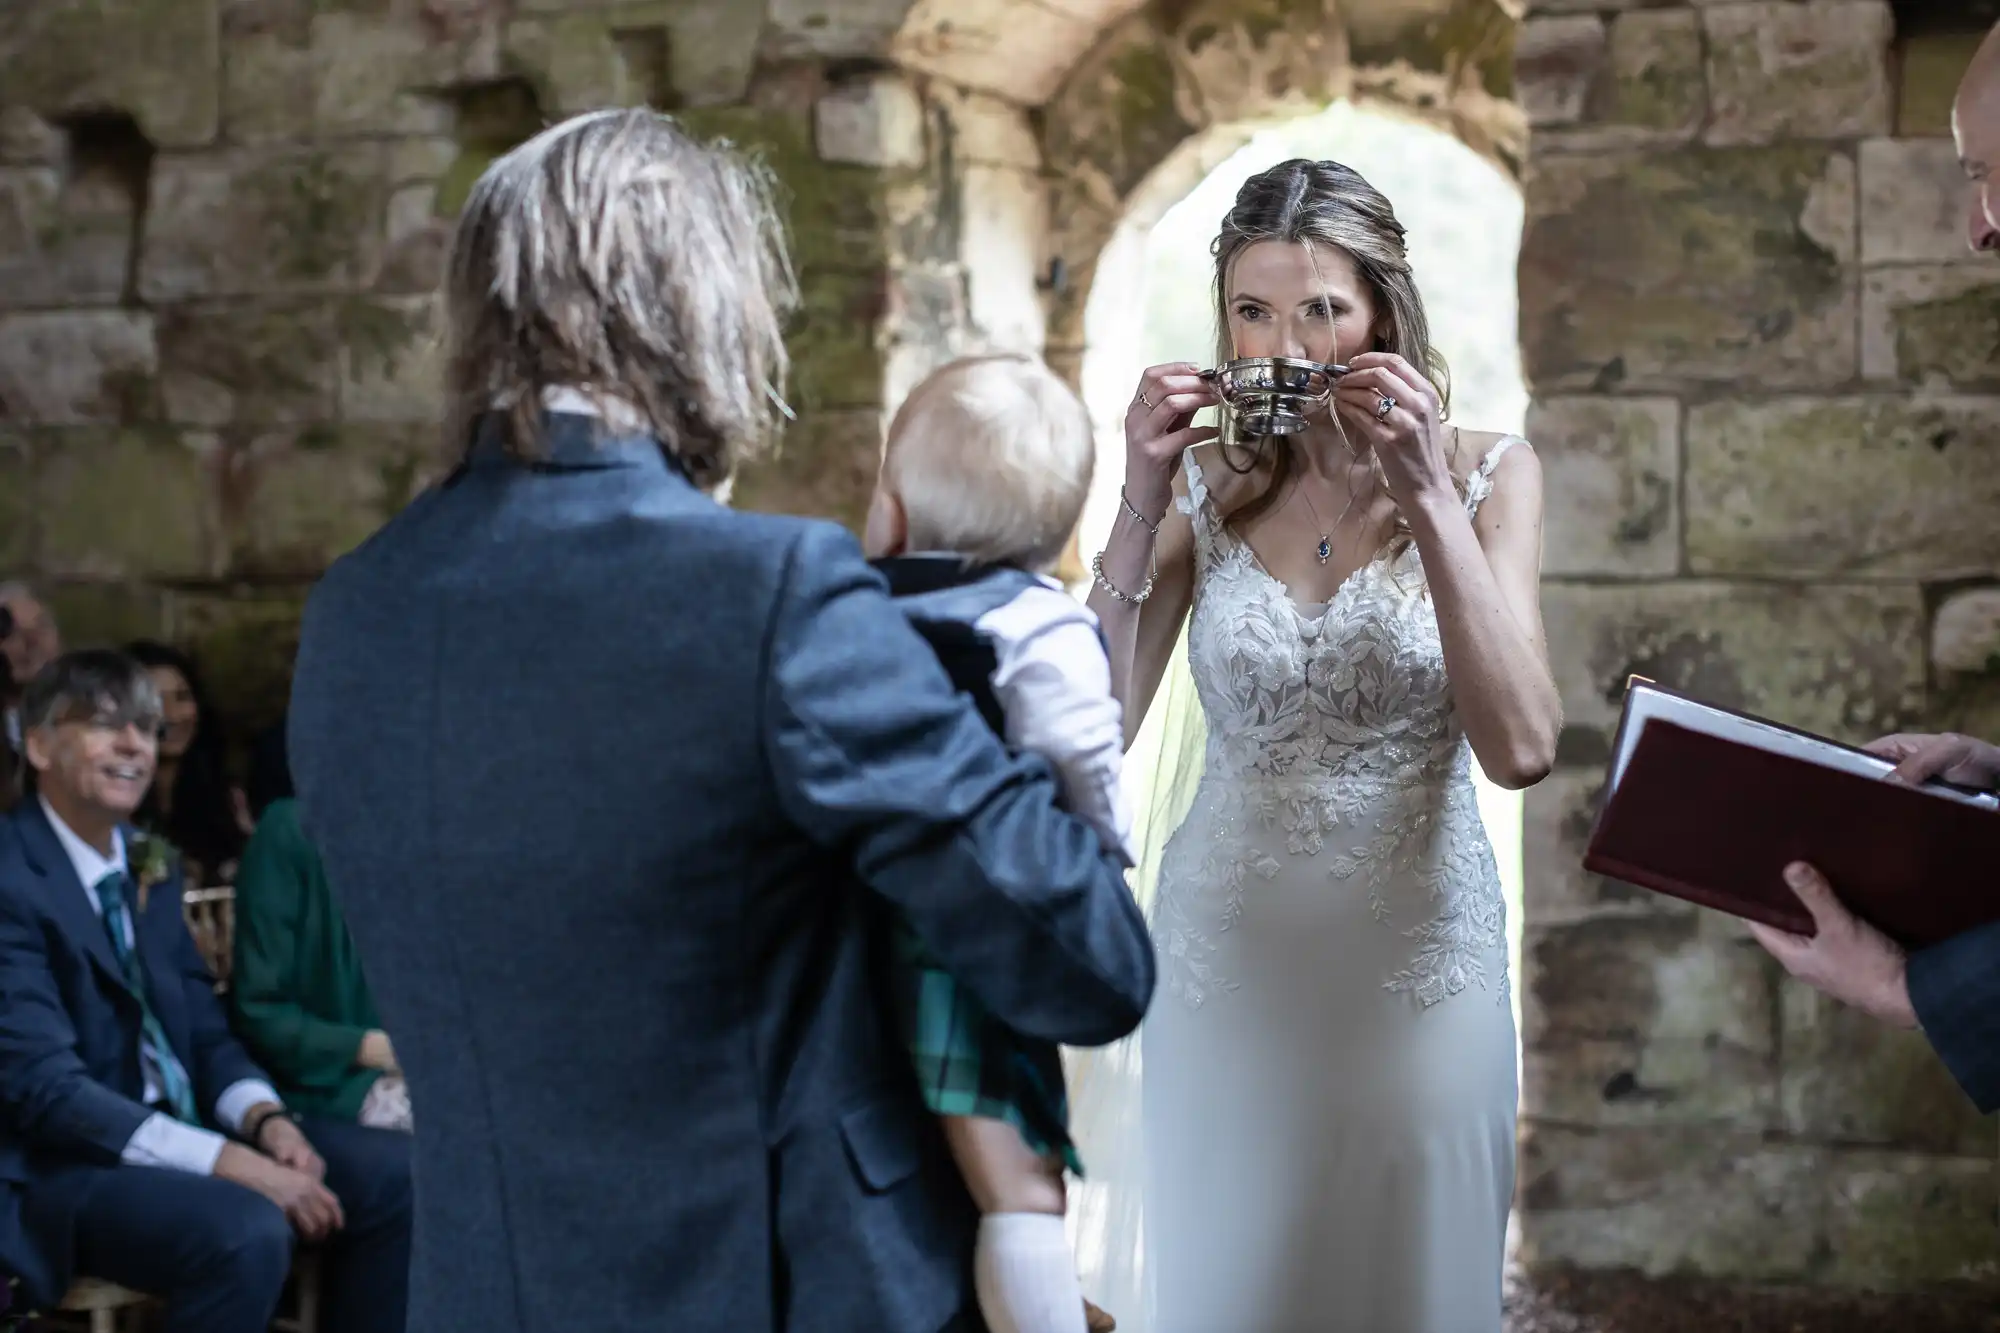 Bride in a white dress drinks from a goblet, while a groom in a blue suit holds a baby, in a stone-walled setting, with guests watching and an officiant holding a book.